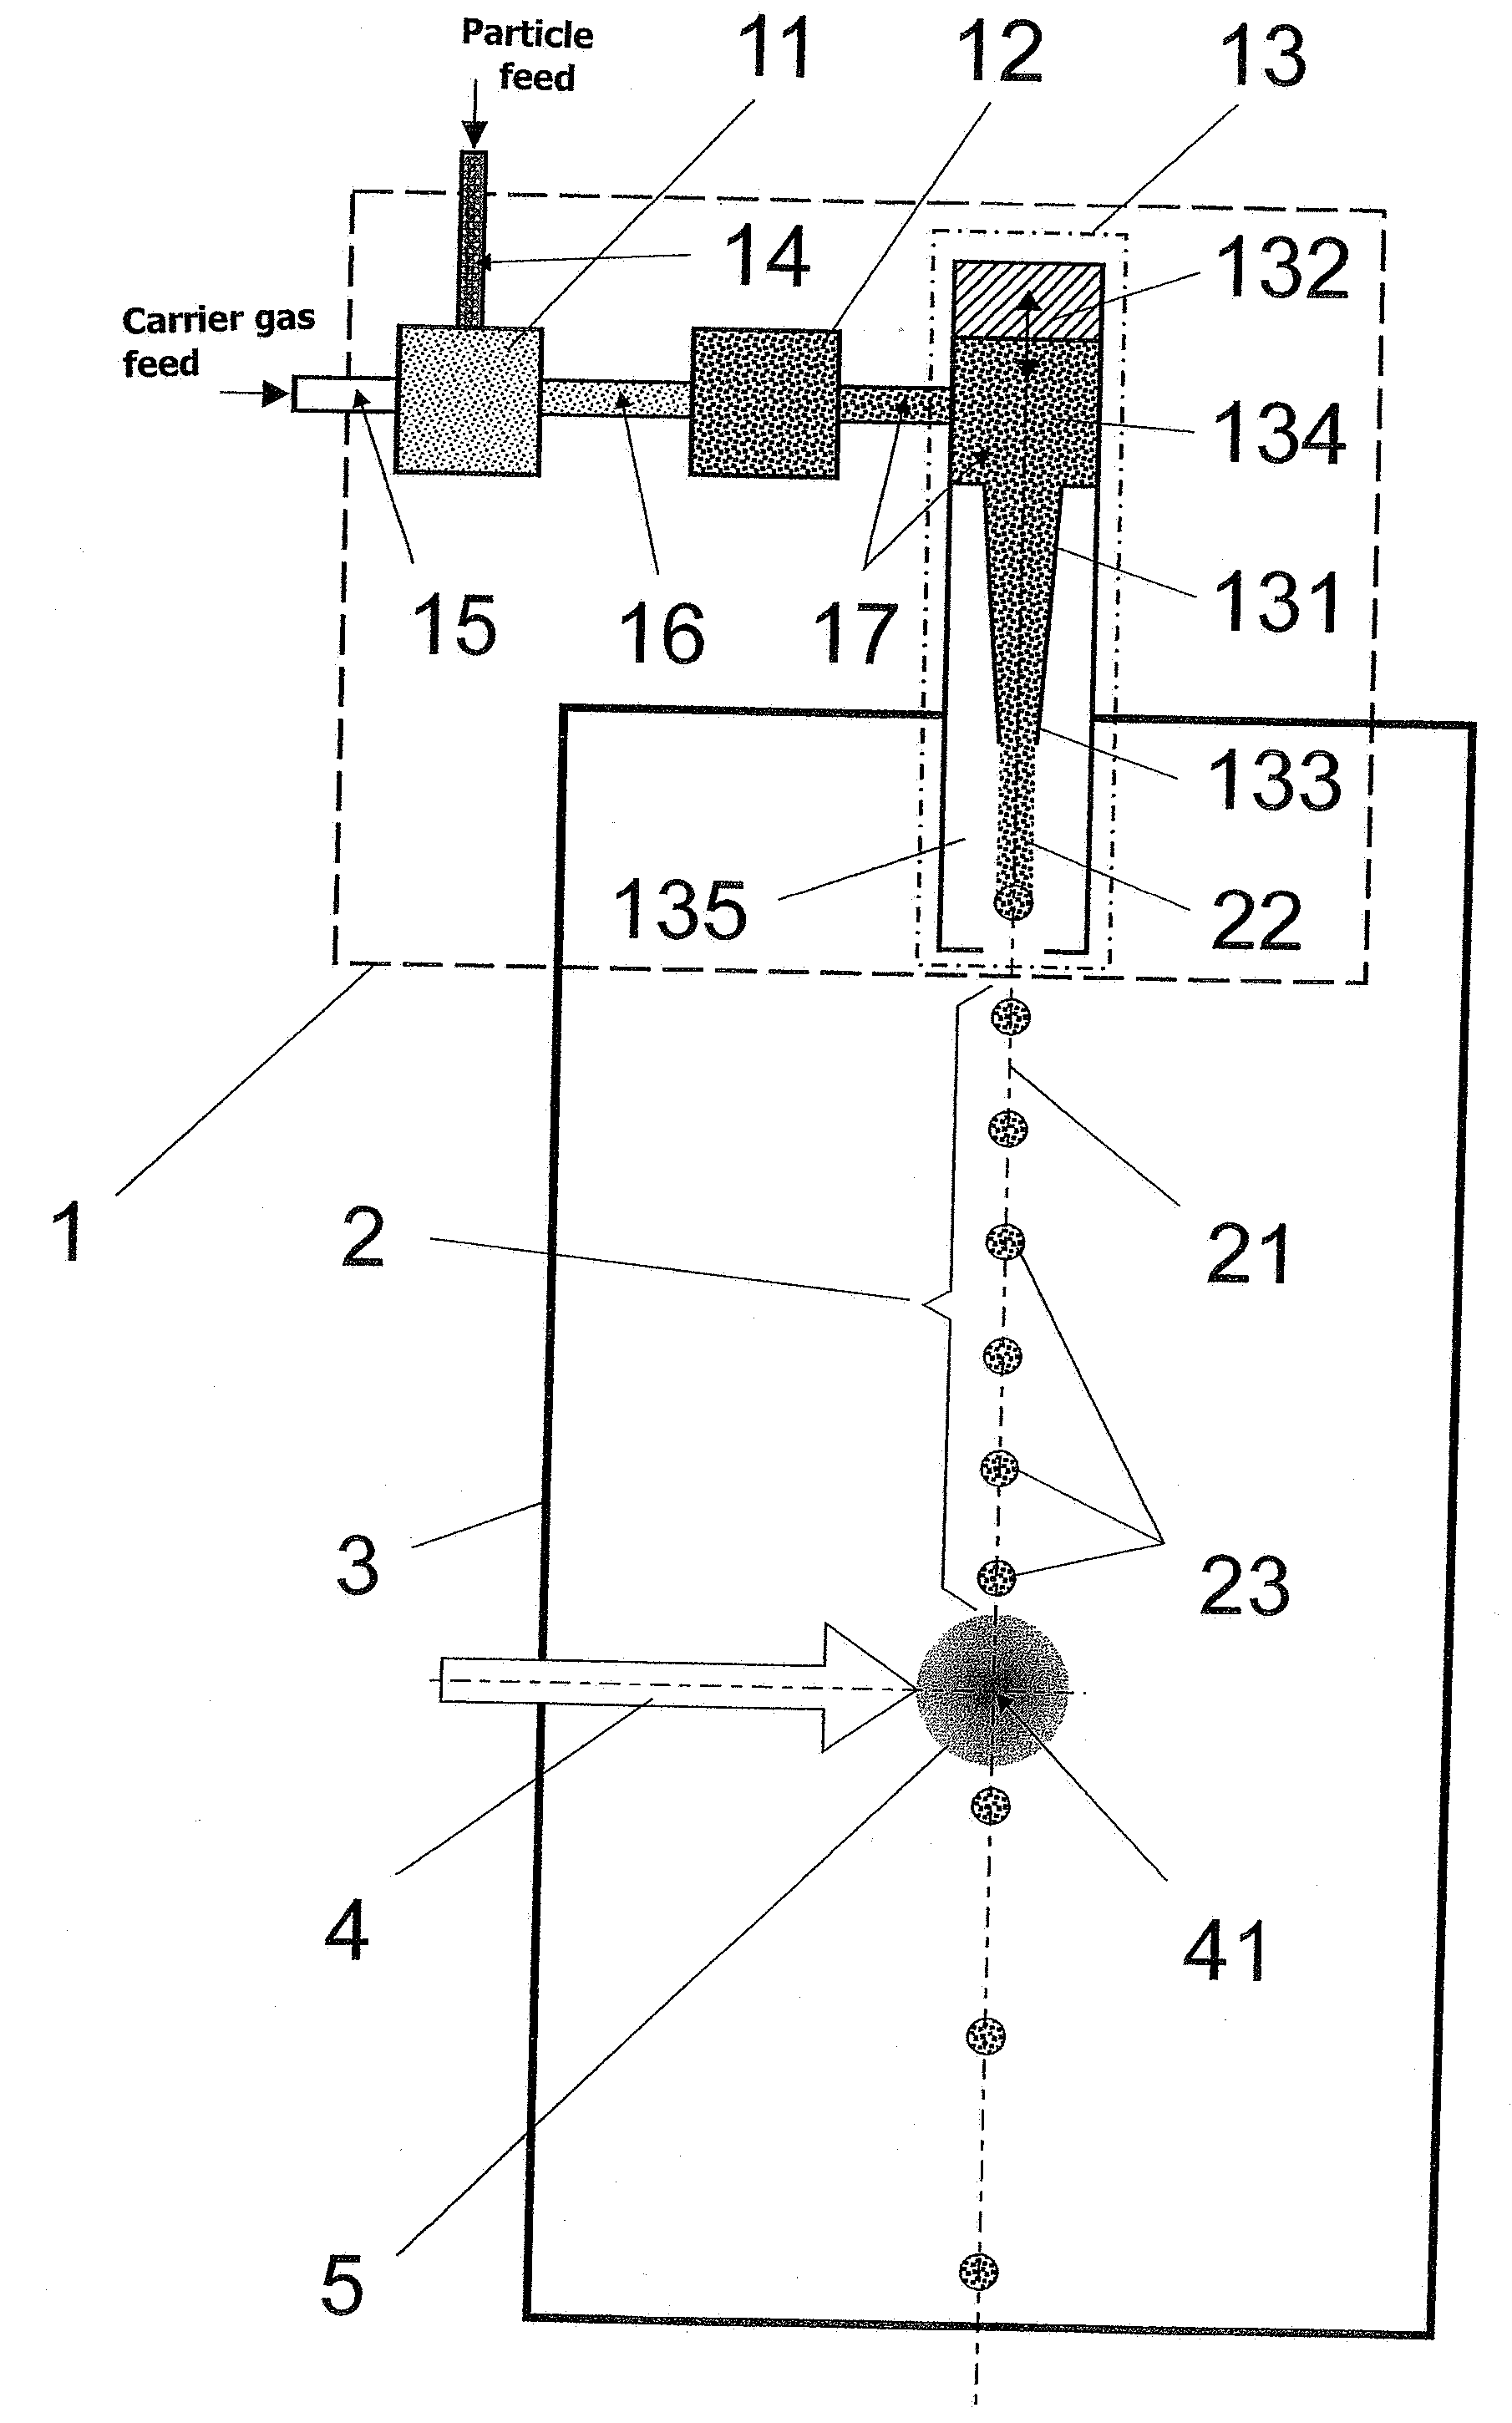 Arrangement for generating extreme ultraviolet radiation from a plasma generated by an energy beam with high conversion efficiency and minimum contamination